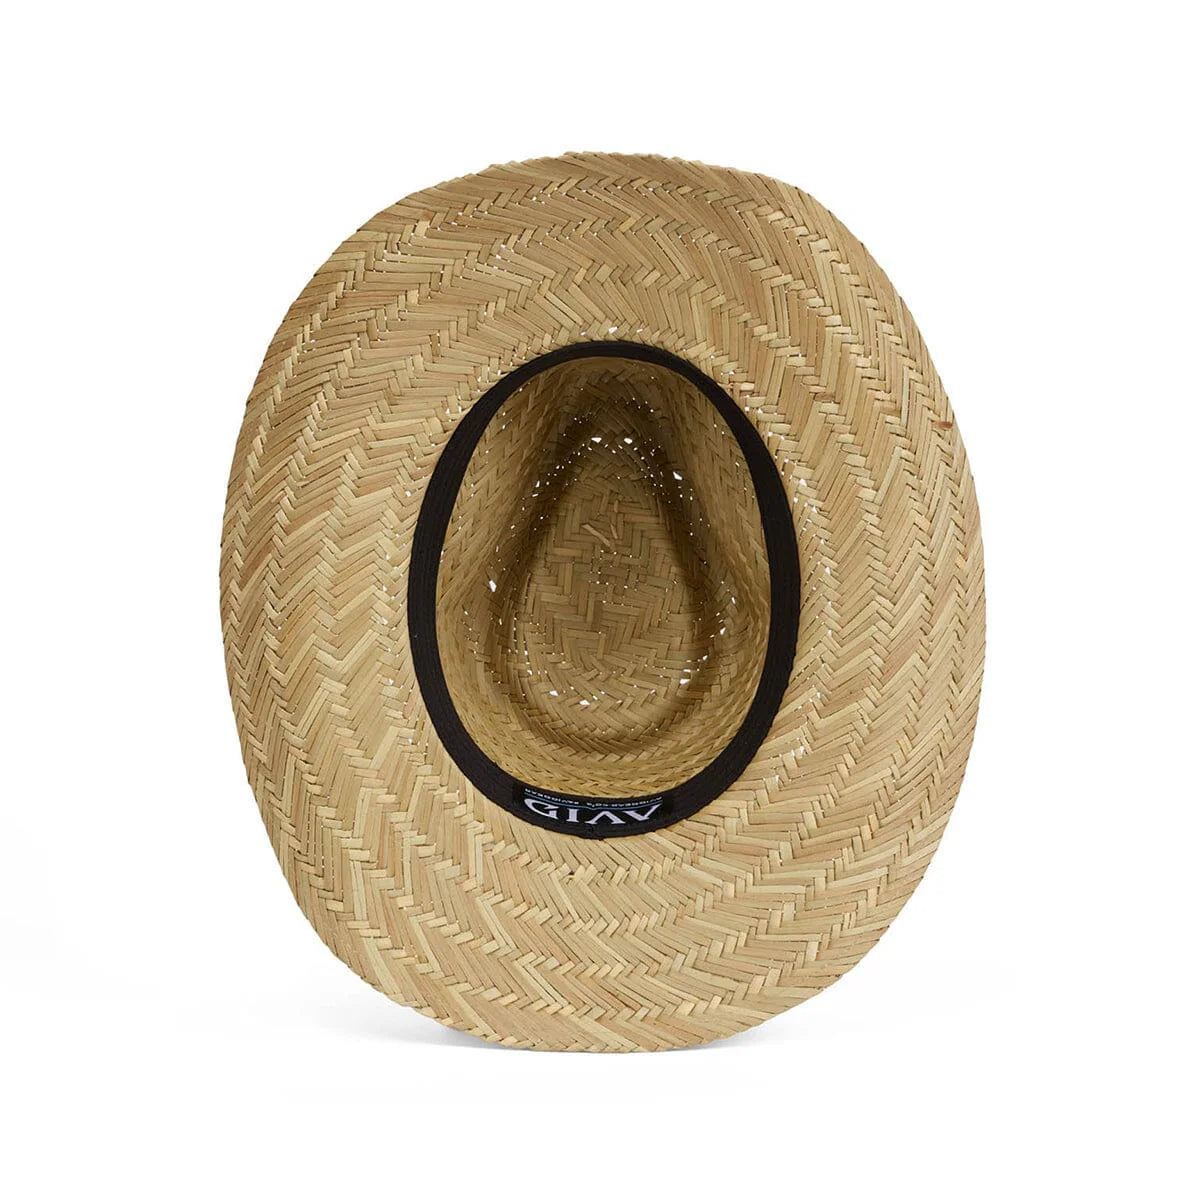 Southern Straw Hat - Natural